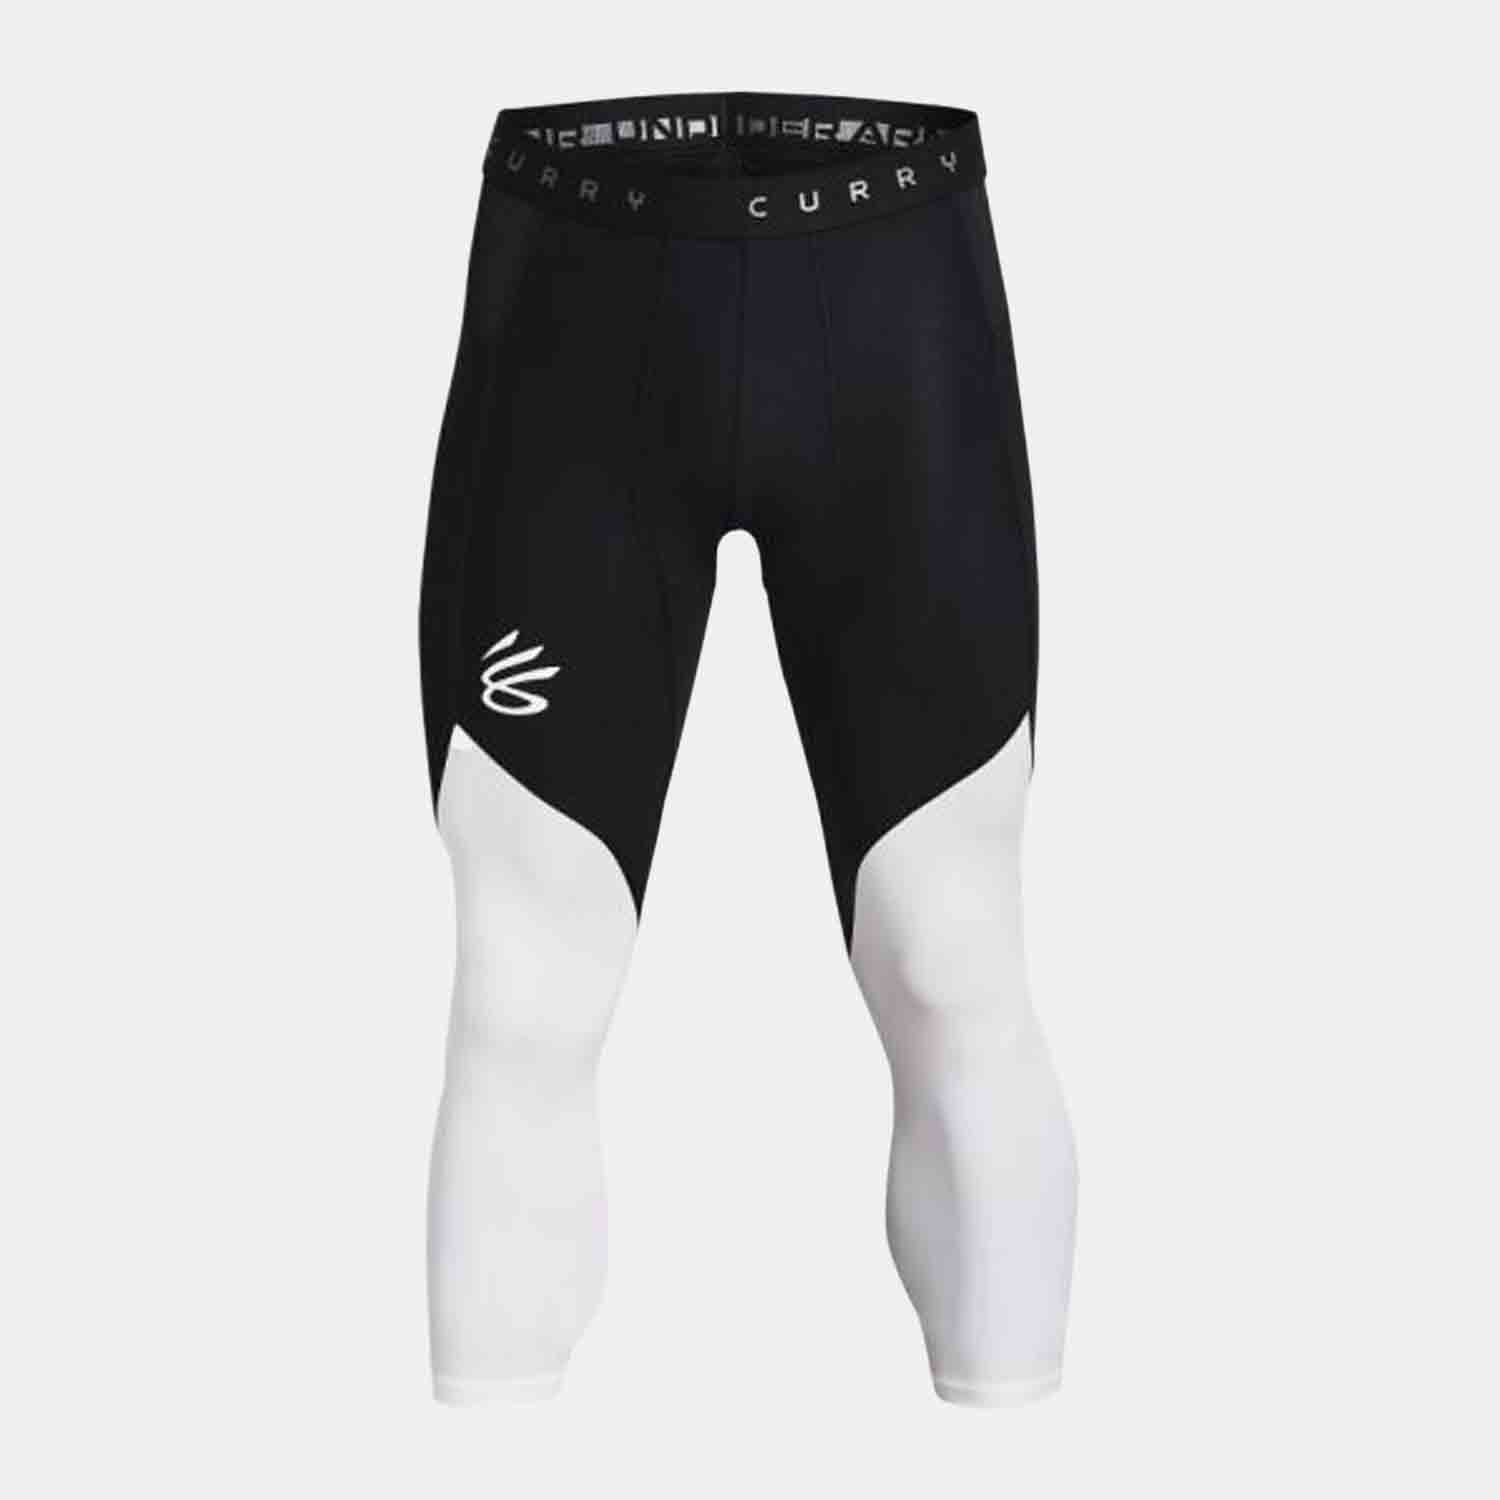 UNDER ARMOUR MENS STEPH CURRY 3/4 TIGHTS